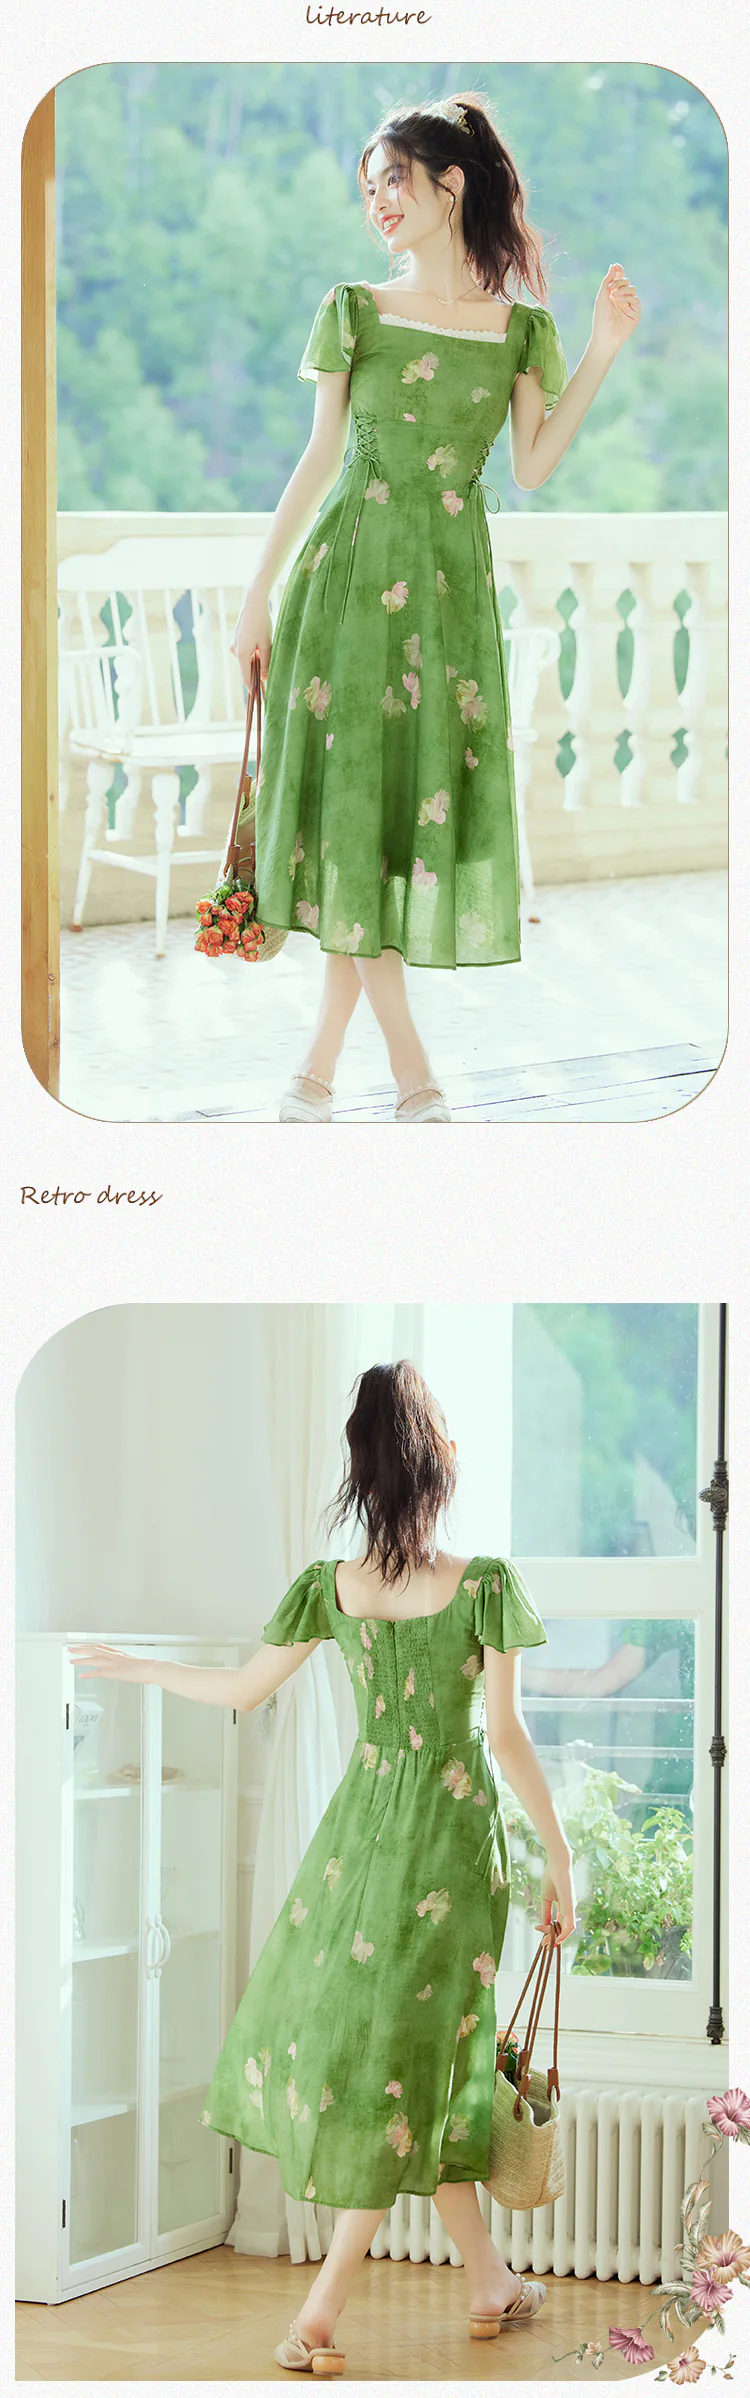 Charming-Square-Neck-Smudge-Floral-Print-Green-Summer-Beach-Dress16